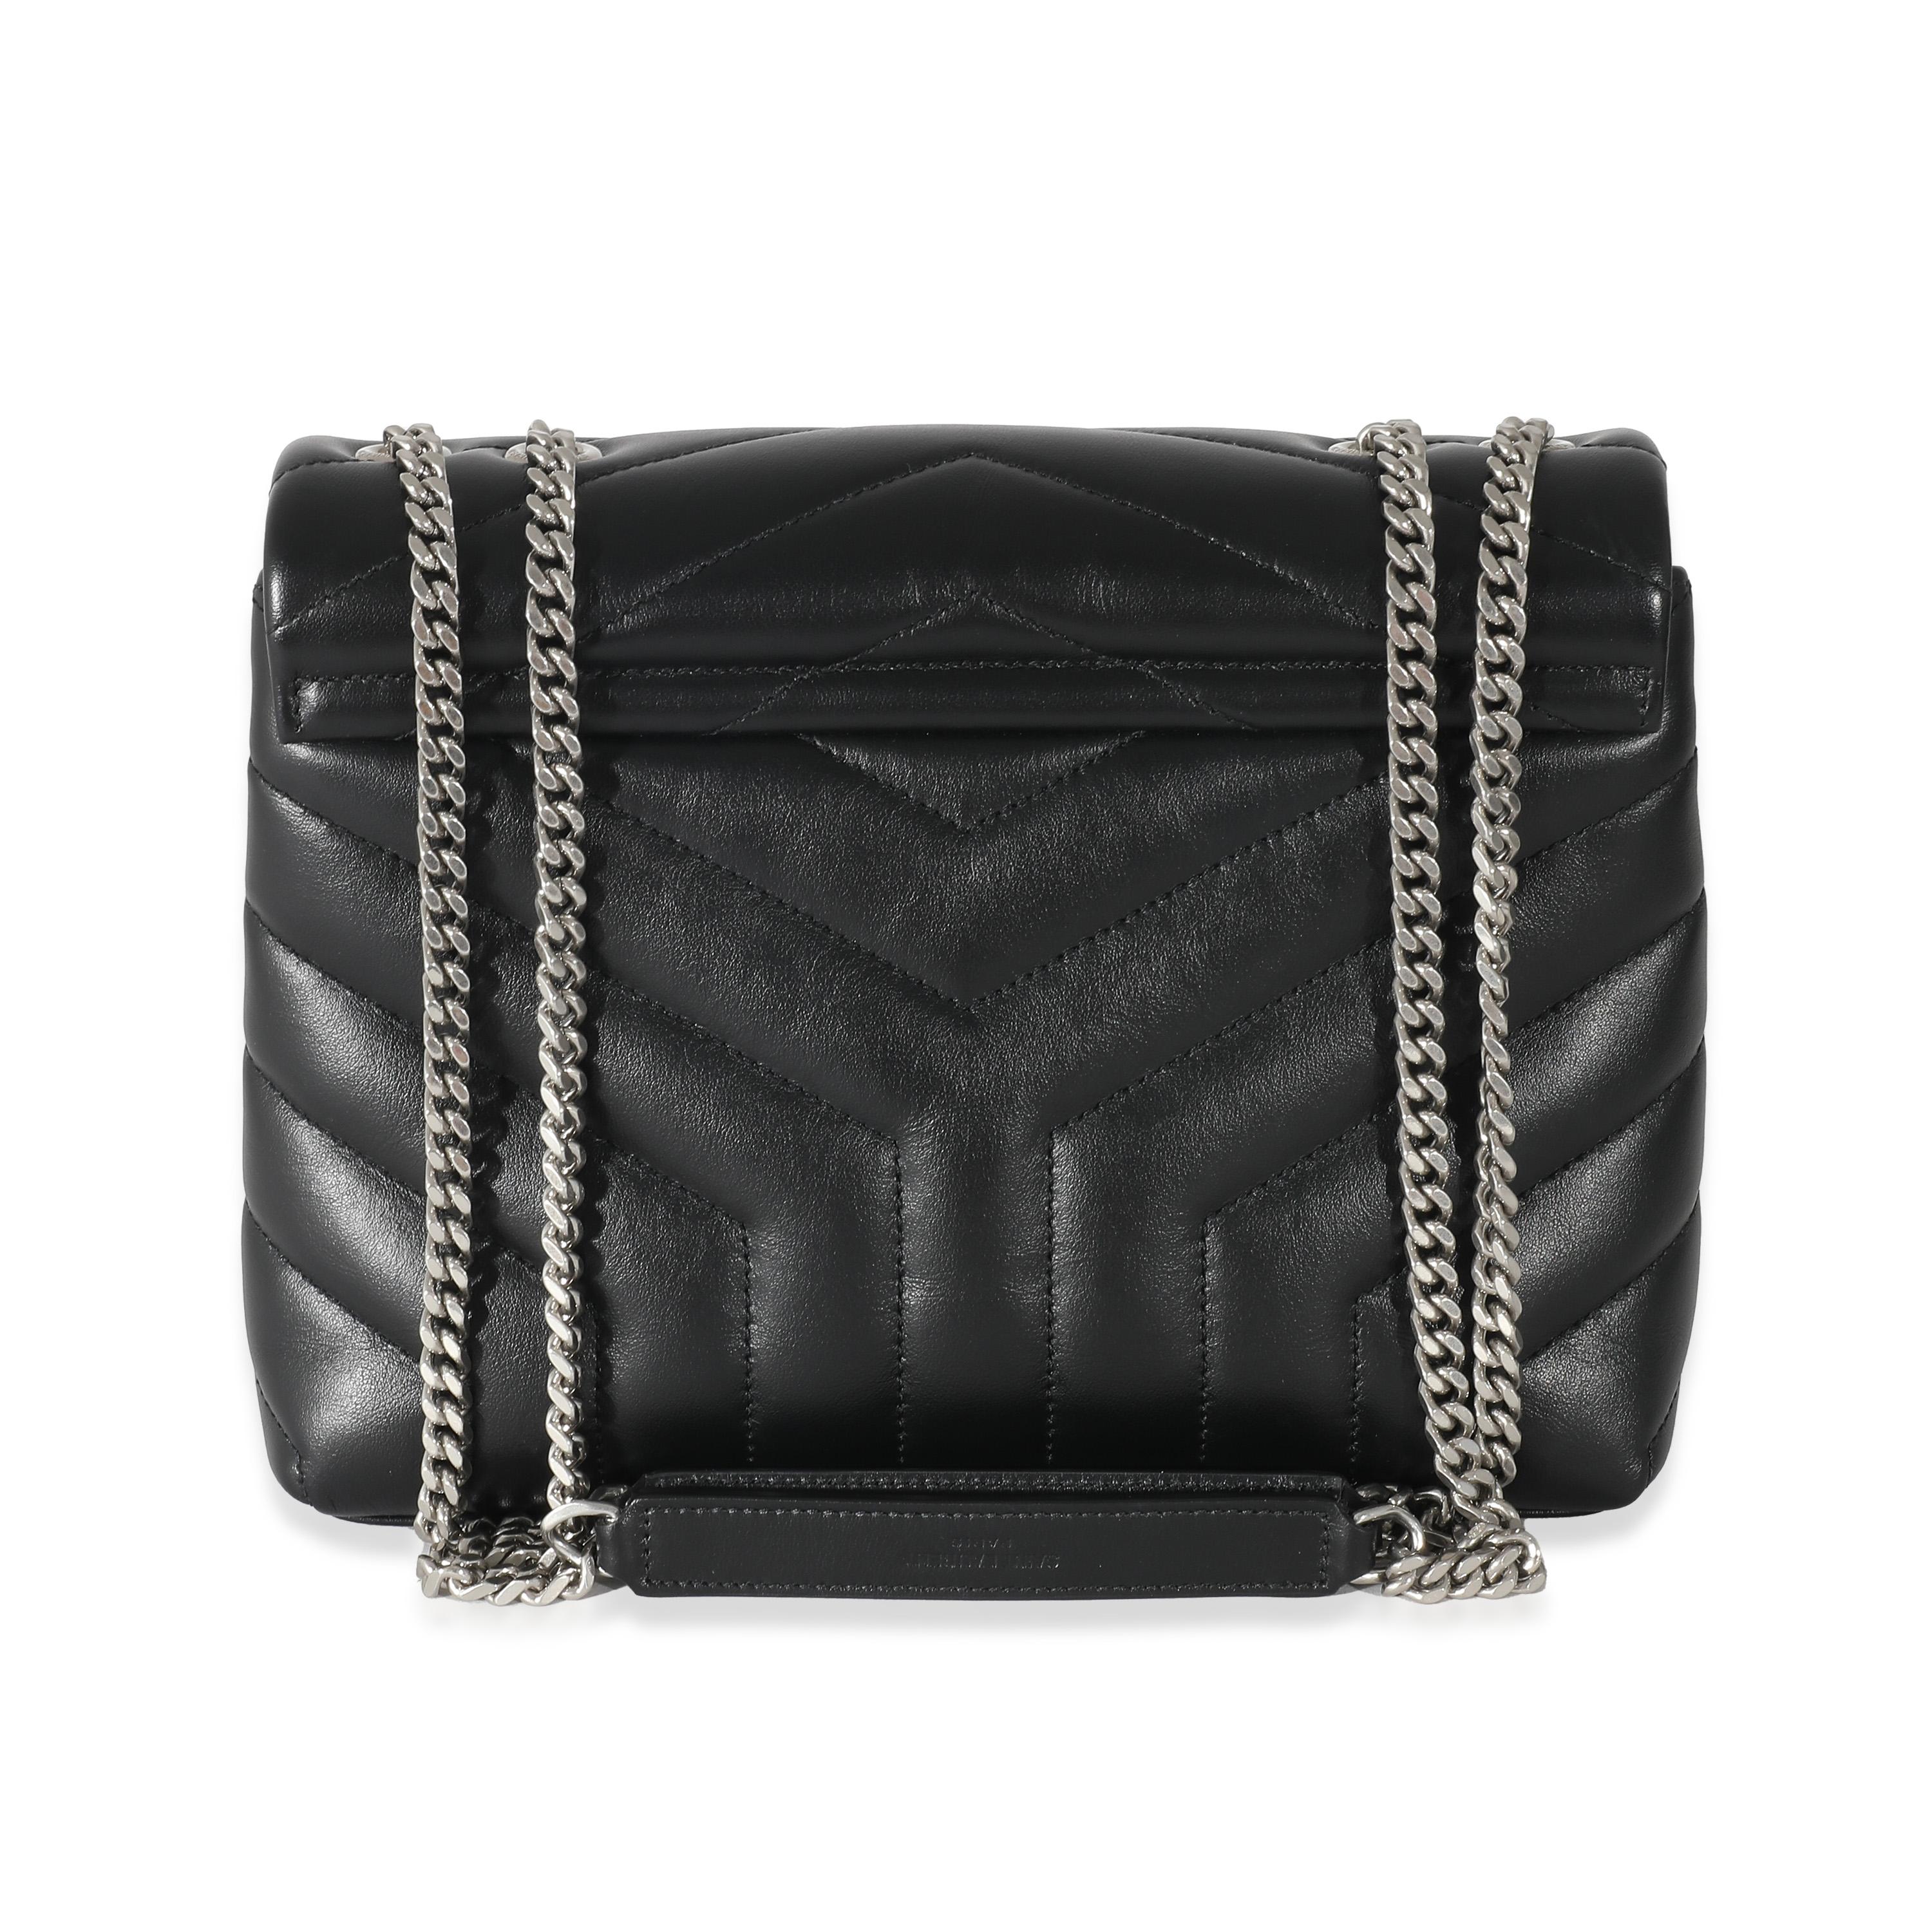 Listing Title: Saint Laurent Black Calfskin Small Loulou
SKU: 131742
MSRP: 2950.00 USD
Condition: Pre-owned 
Condition Description: Named after Loulou de la Falaise, the Loulou bag from Saint Laurent is an ode to one of the founder's greatest muses.